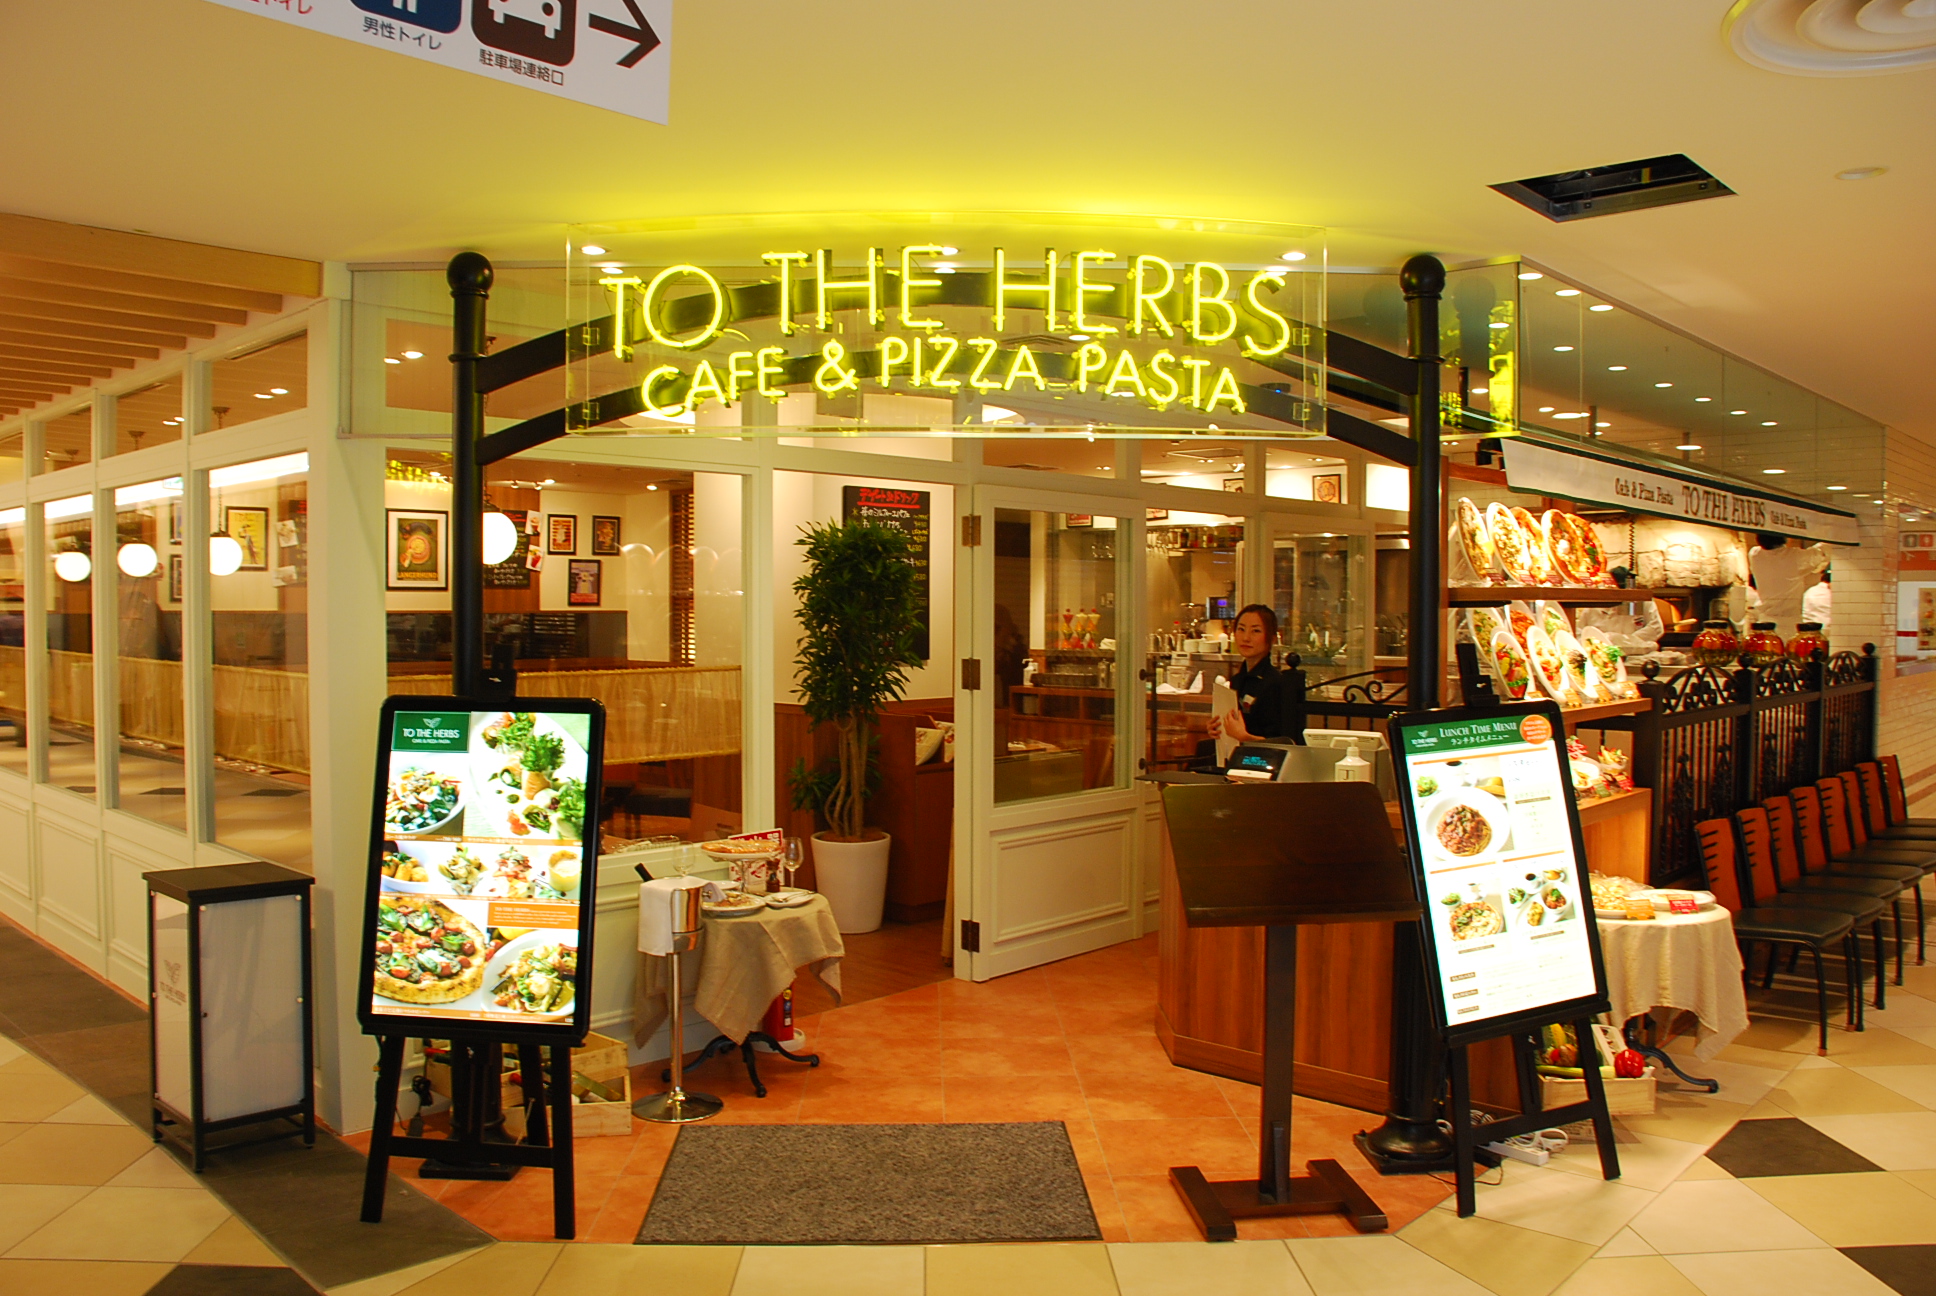 Images TO THE HERBS